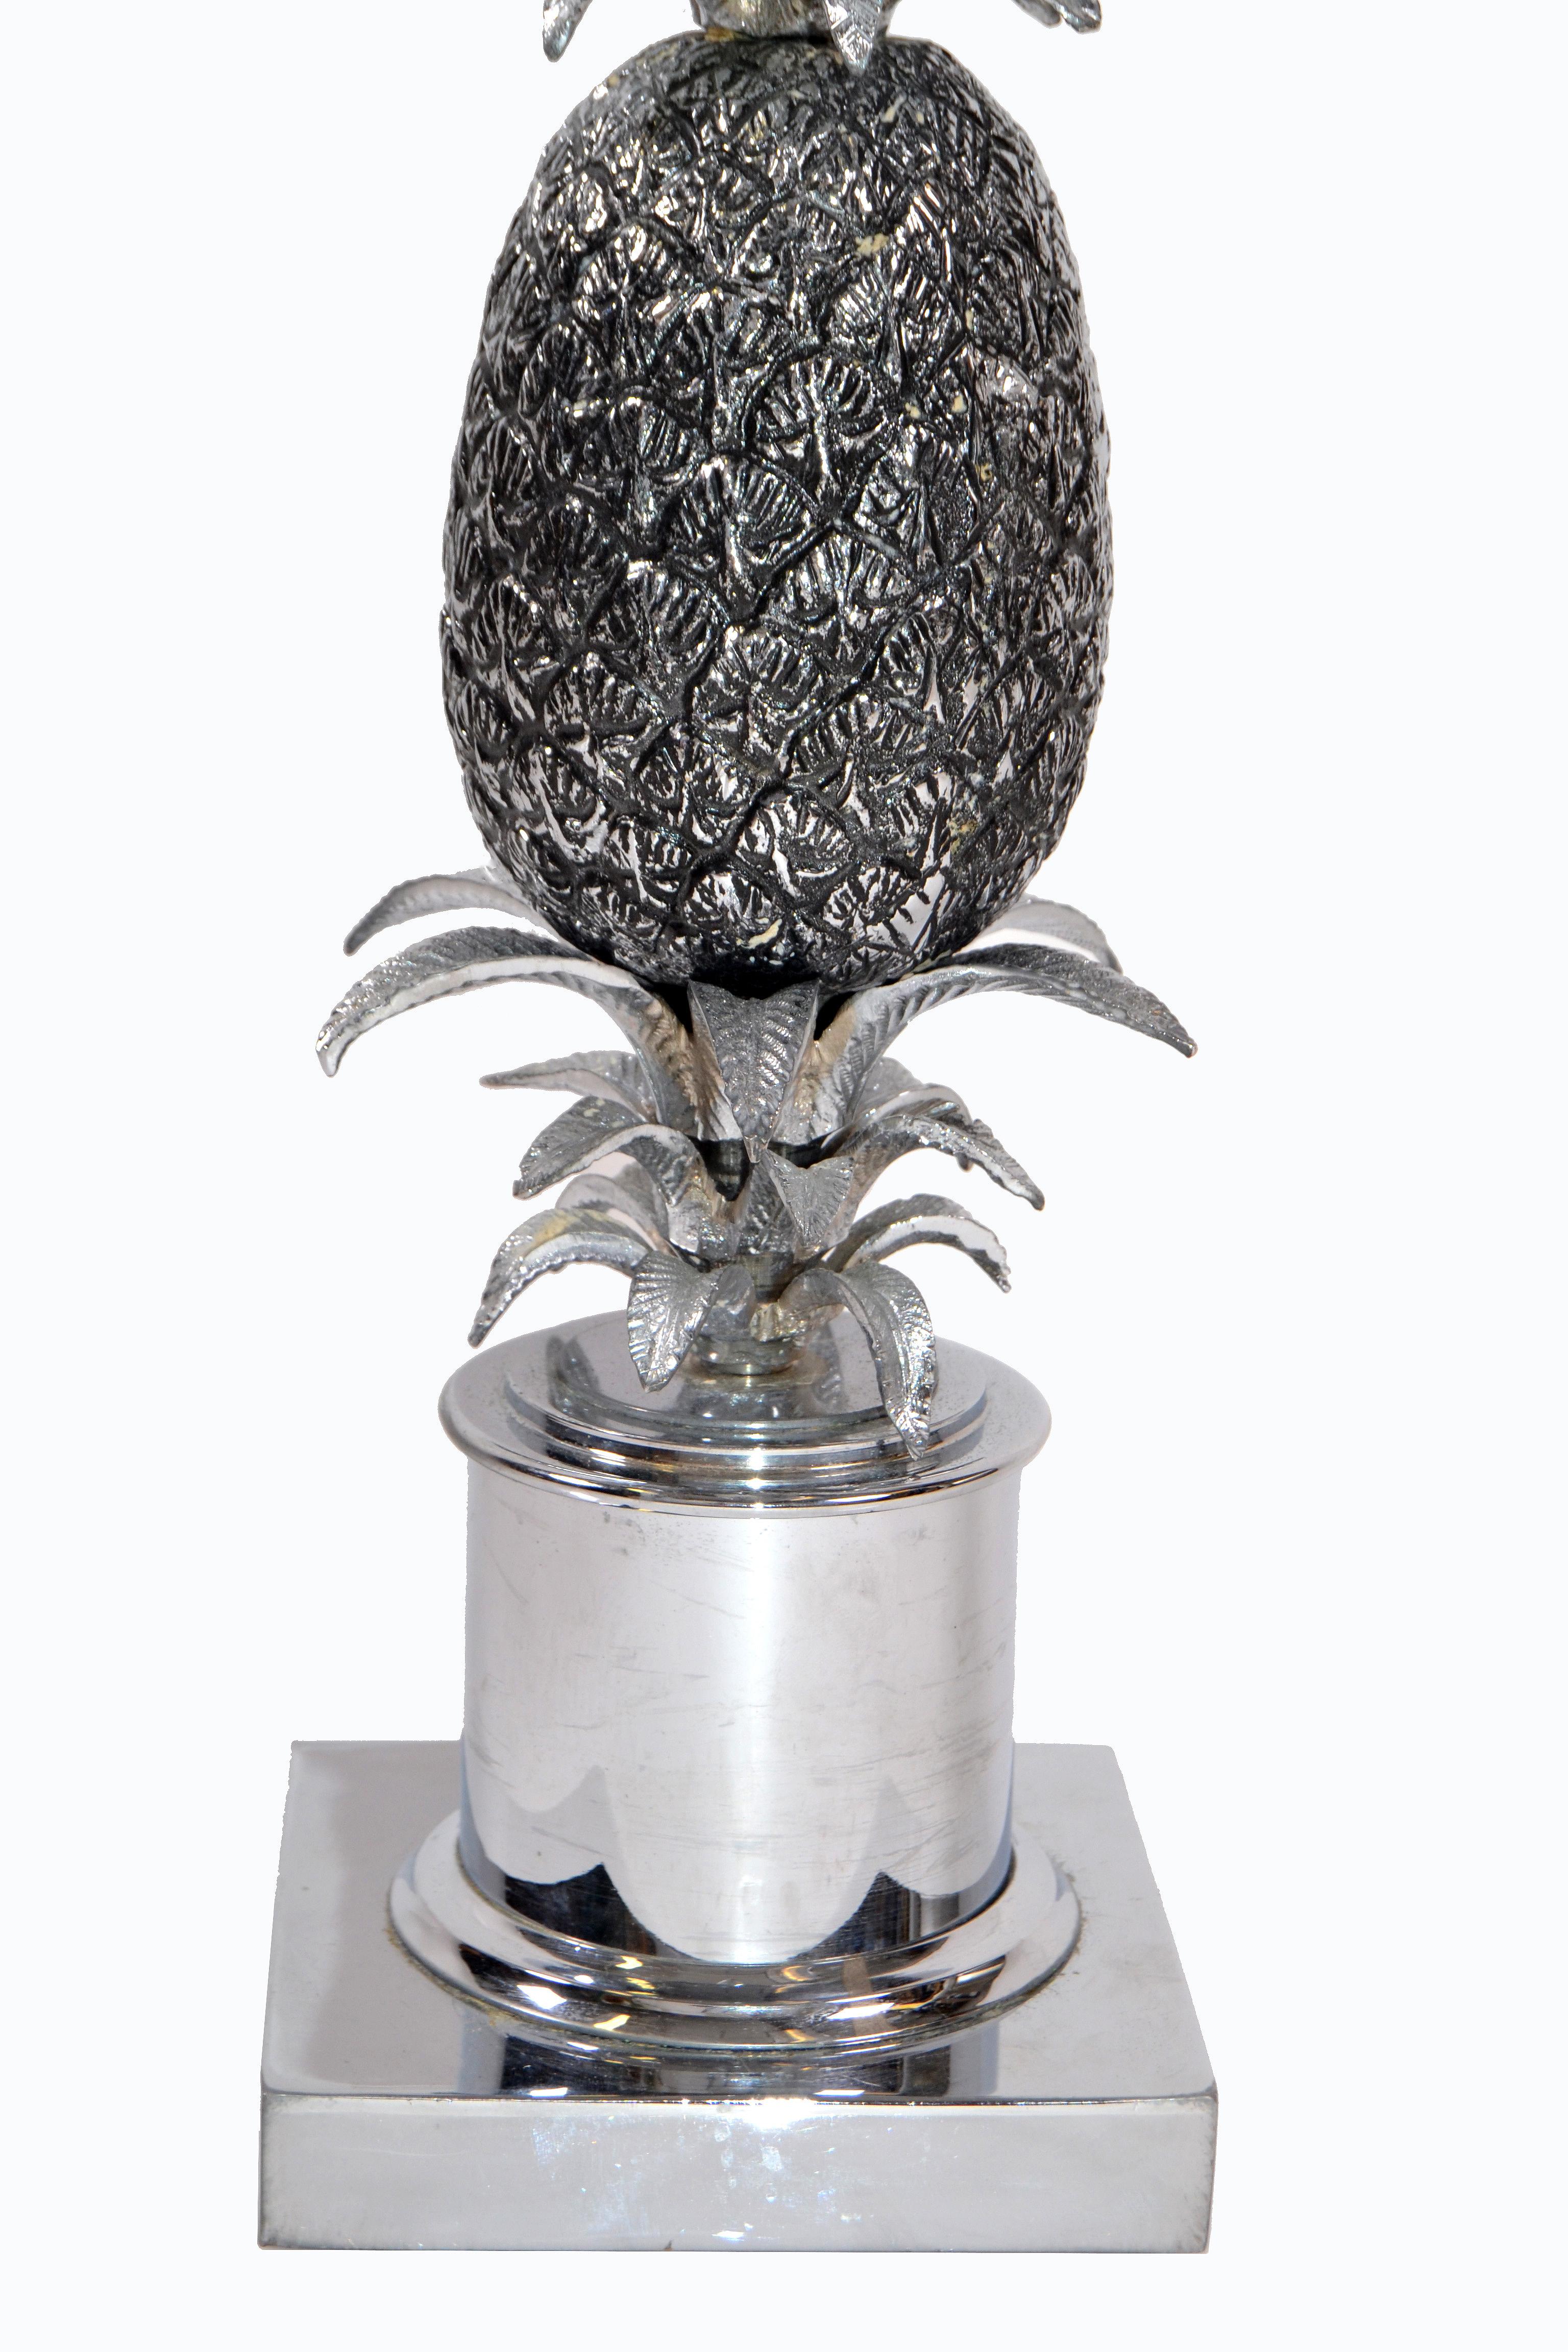 Maison Charles Chrome and Nickel Pineapple Table Lamp French Provincial 1960s In Good Condition For Sale In Miami, FL